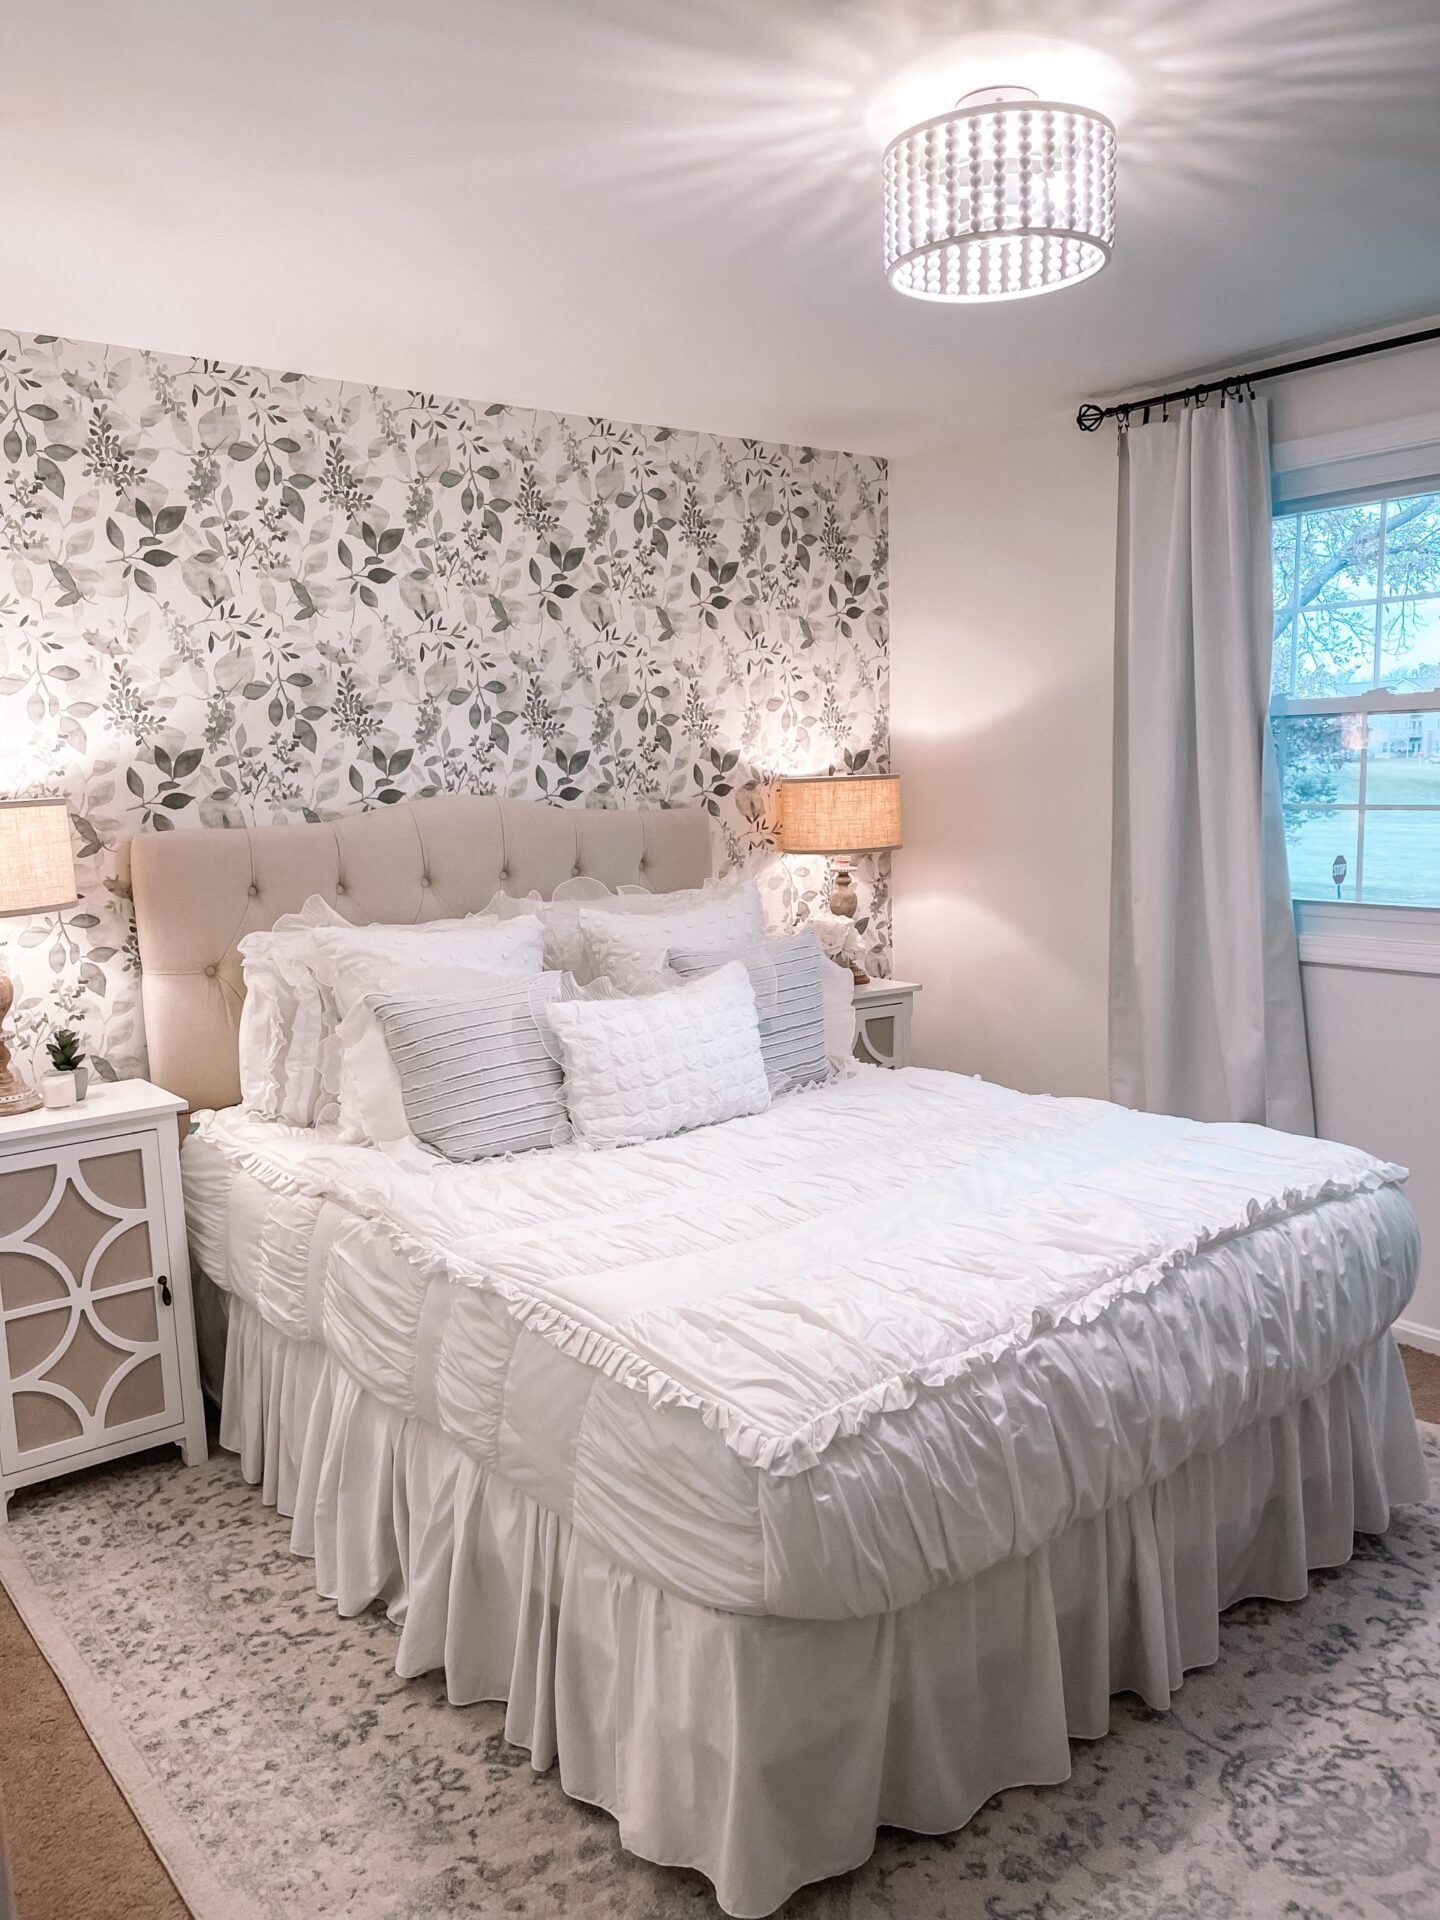 zip bedding from Beddy's for guest bedroom makeover on a budget by lifestyle blogger Angela Lanter. Beddy's Charlotte Luxe zipper bedding set.